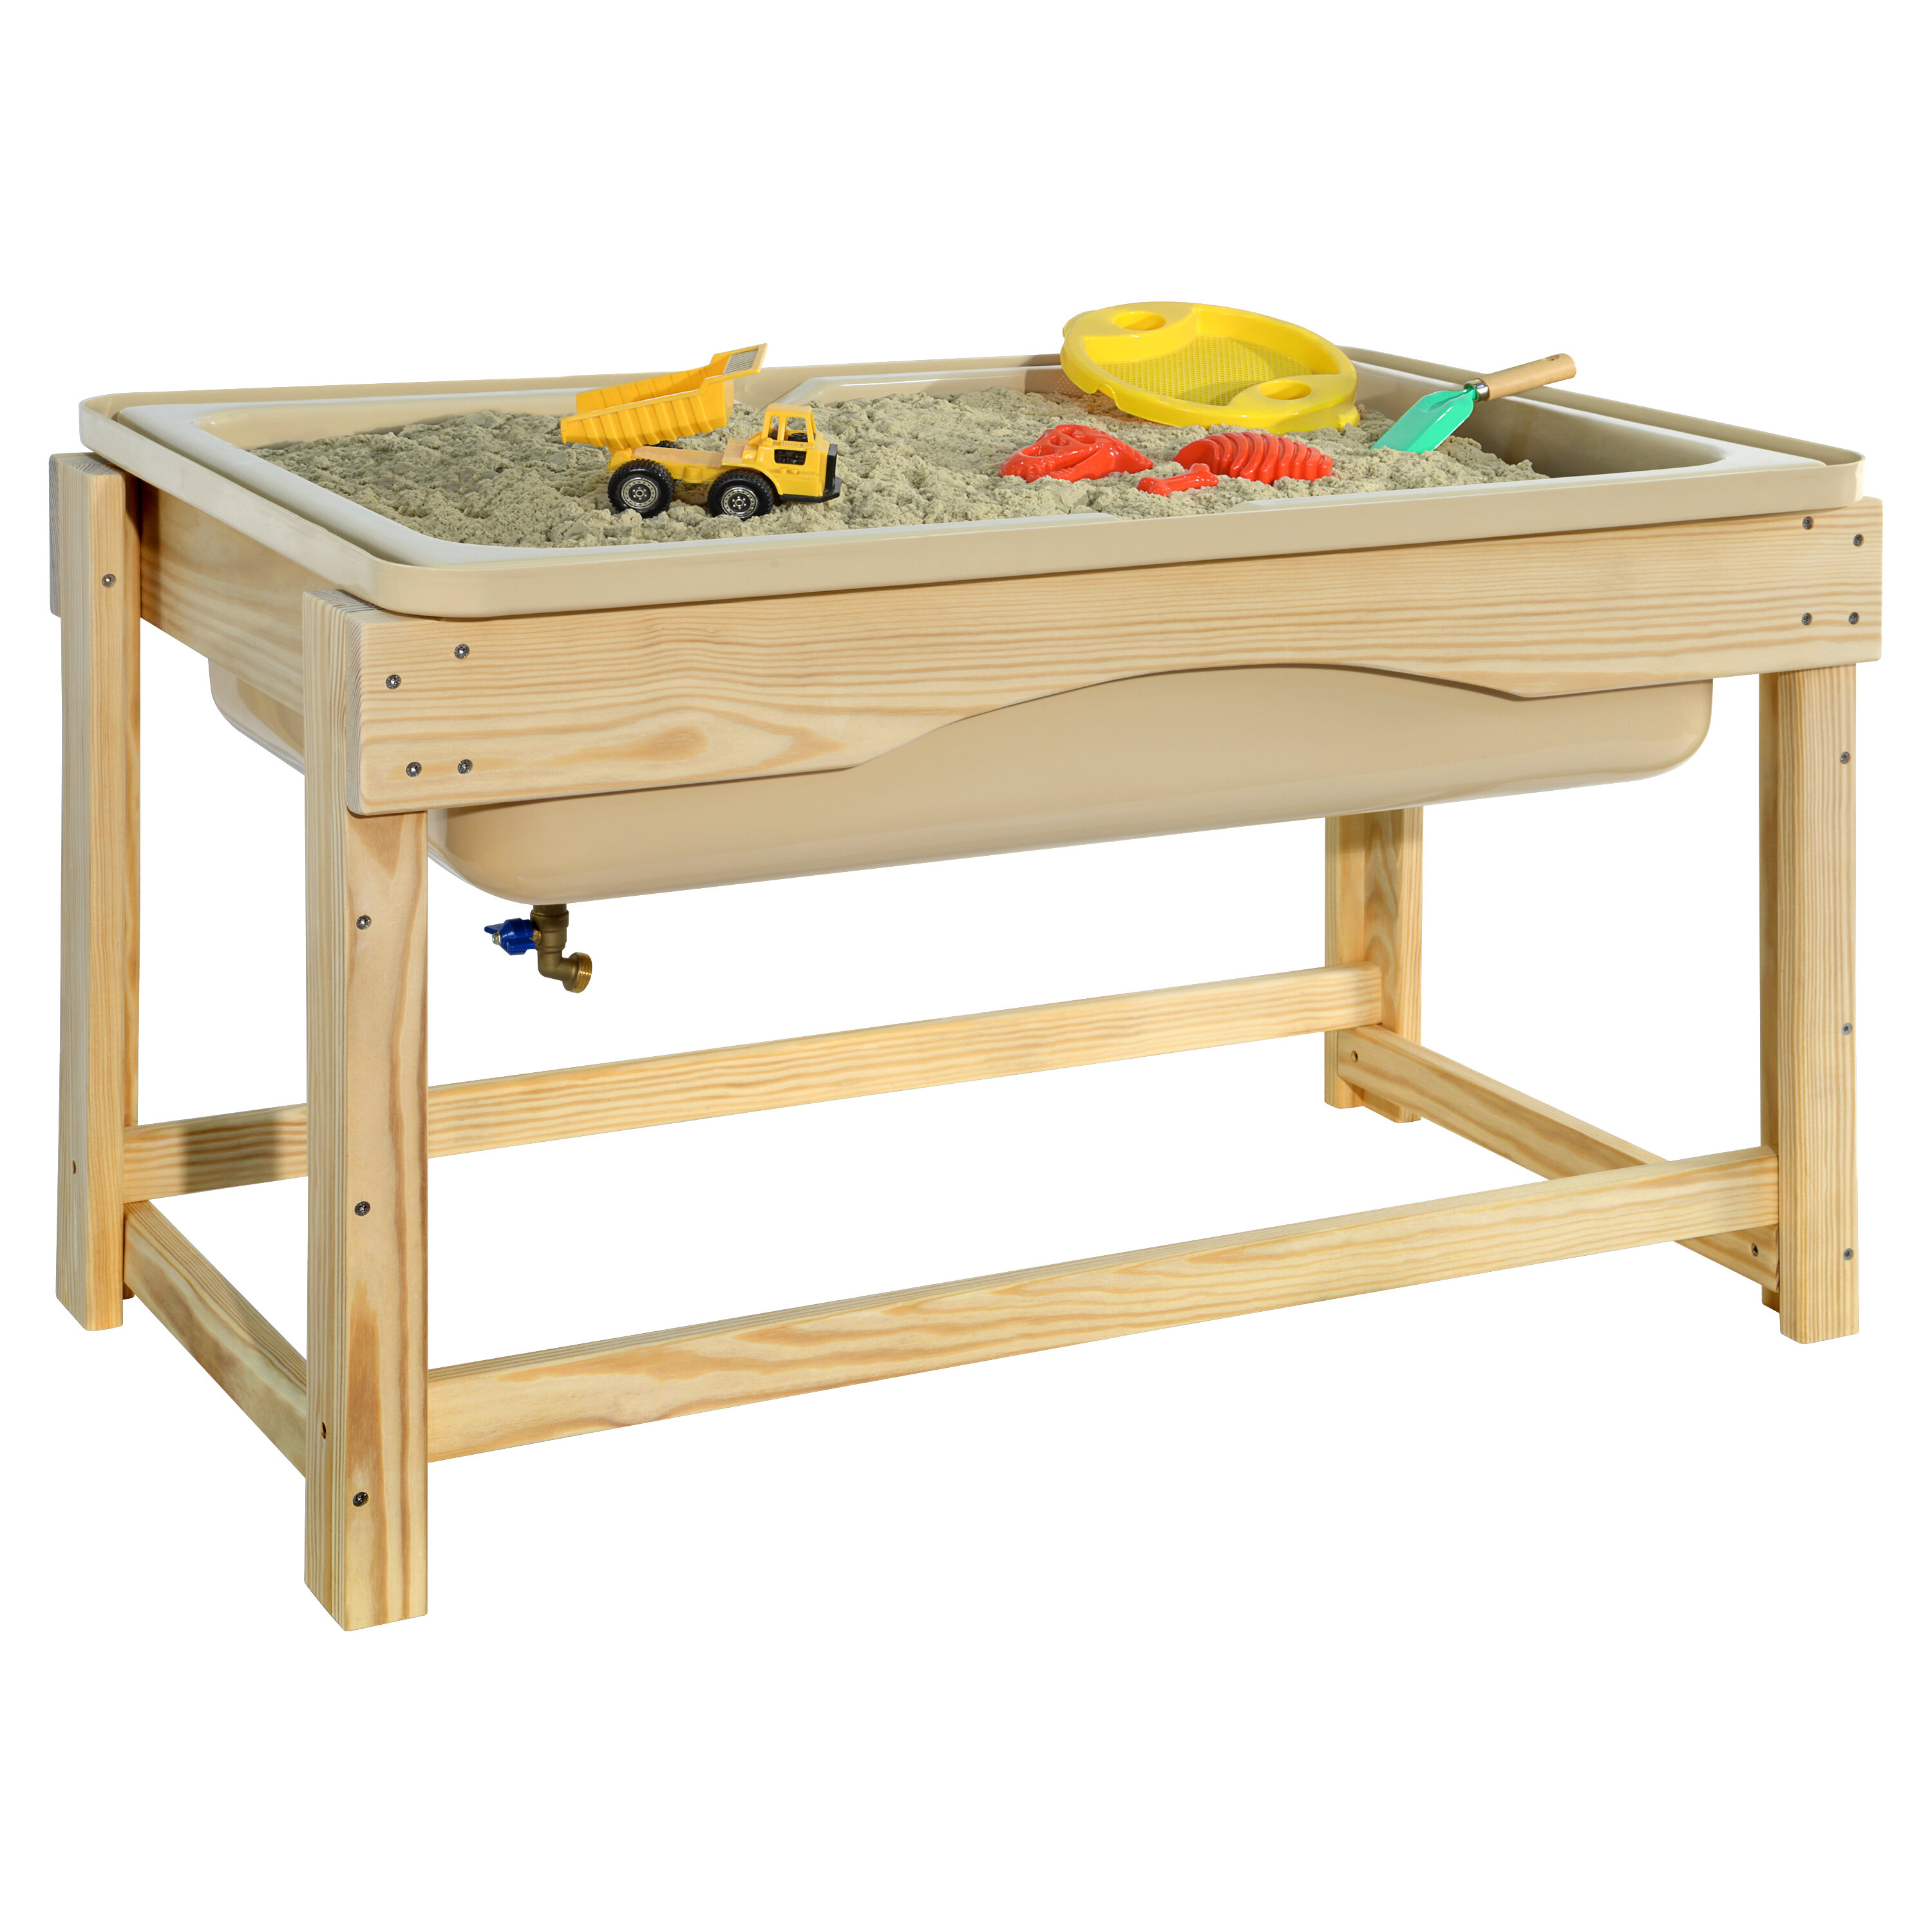 outdoor play sand